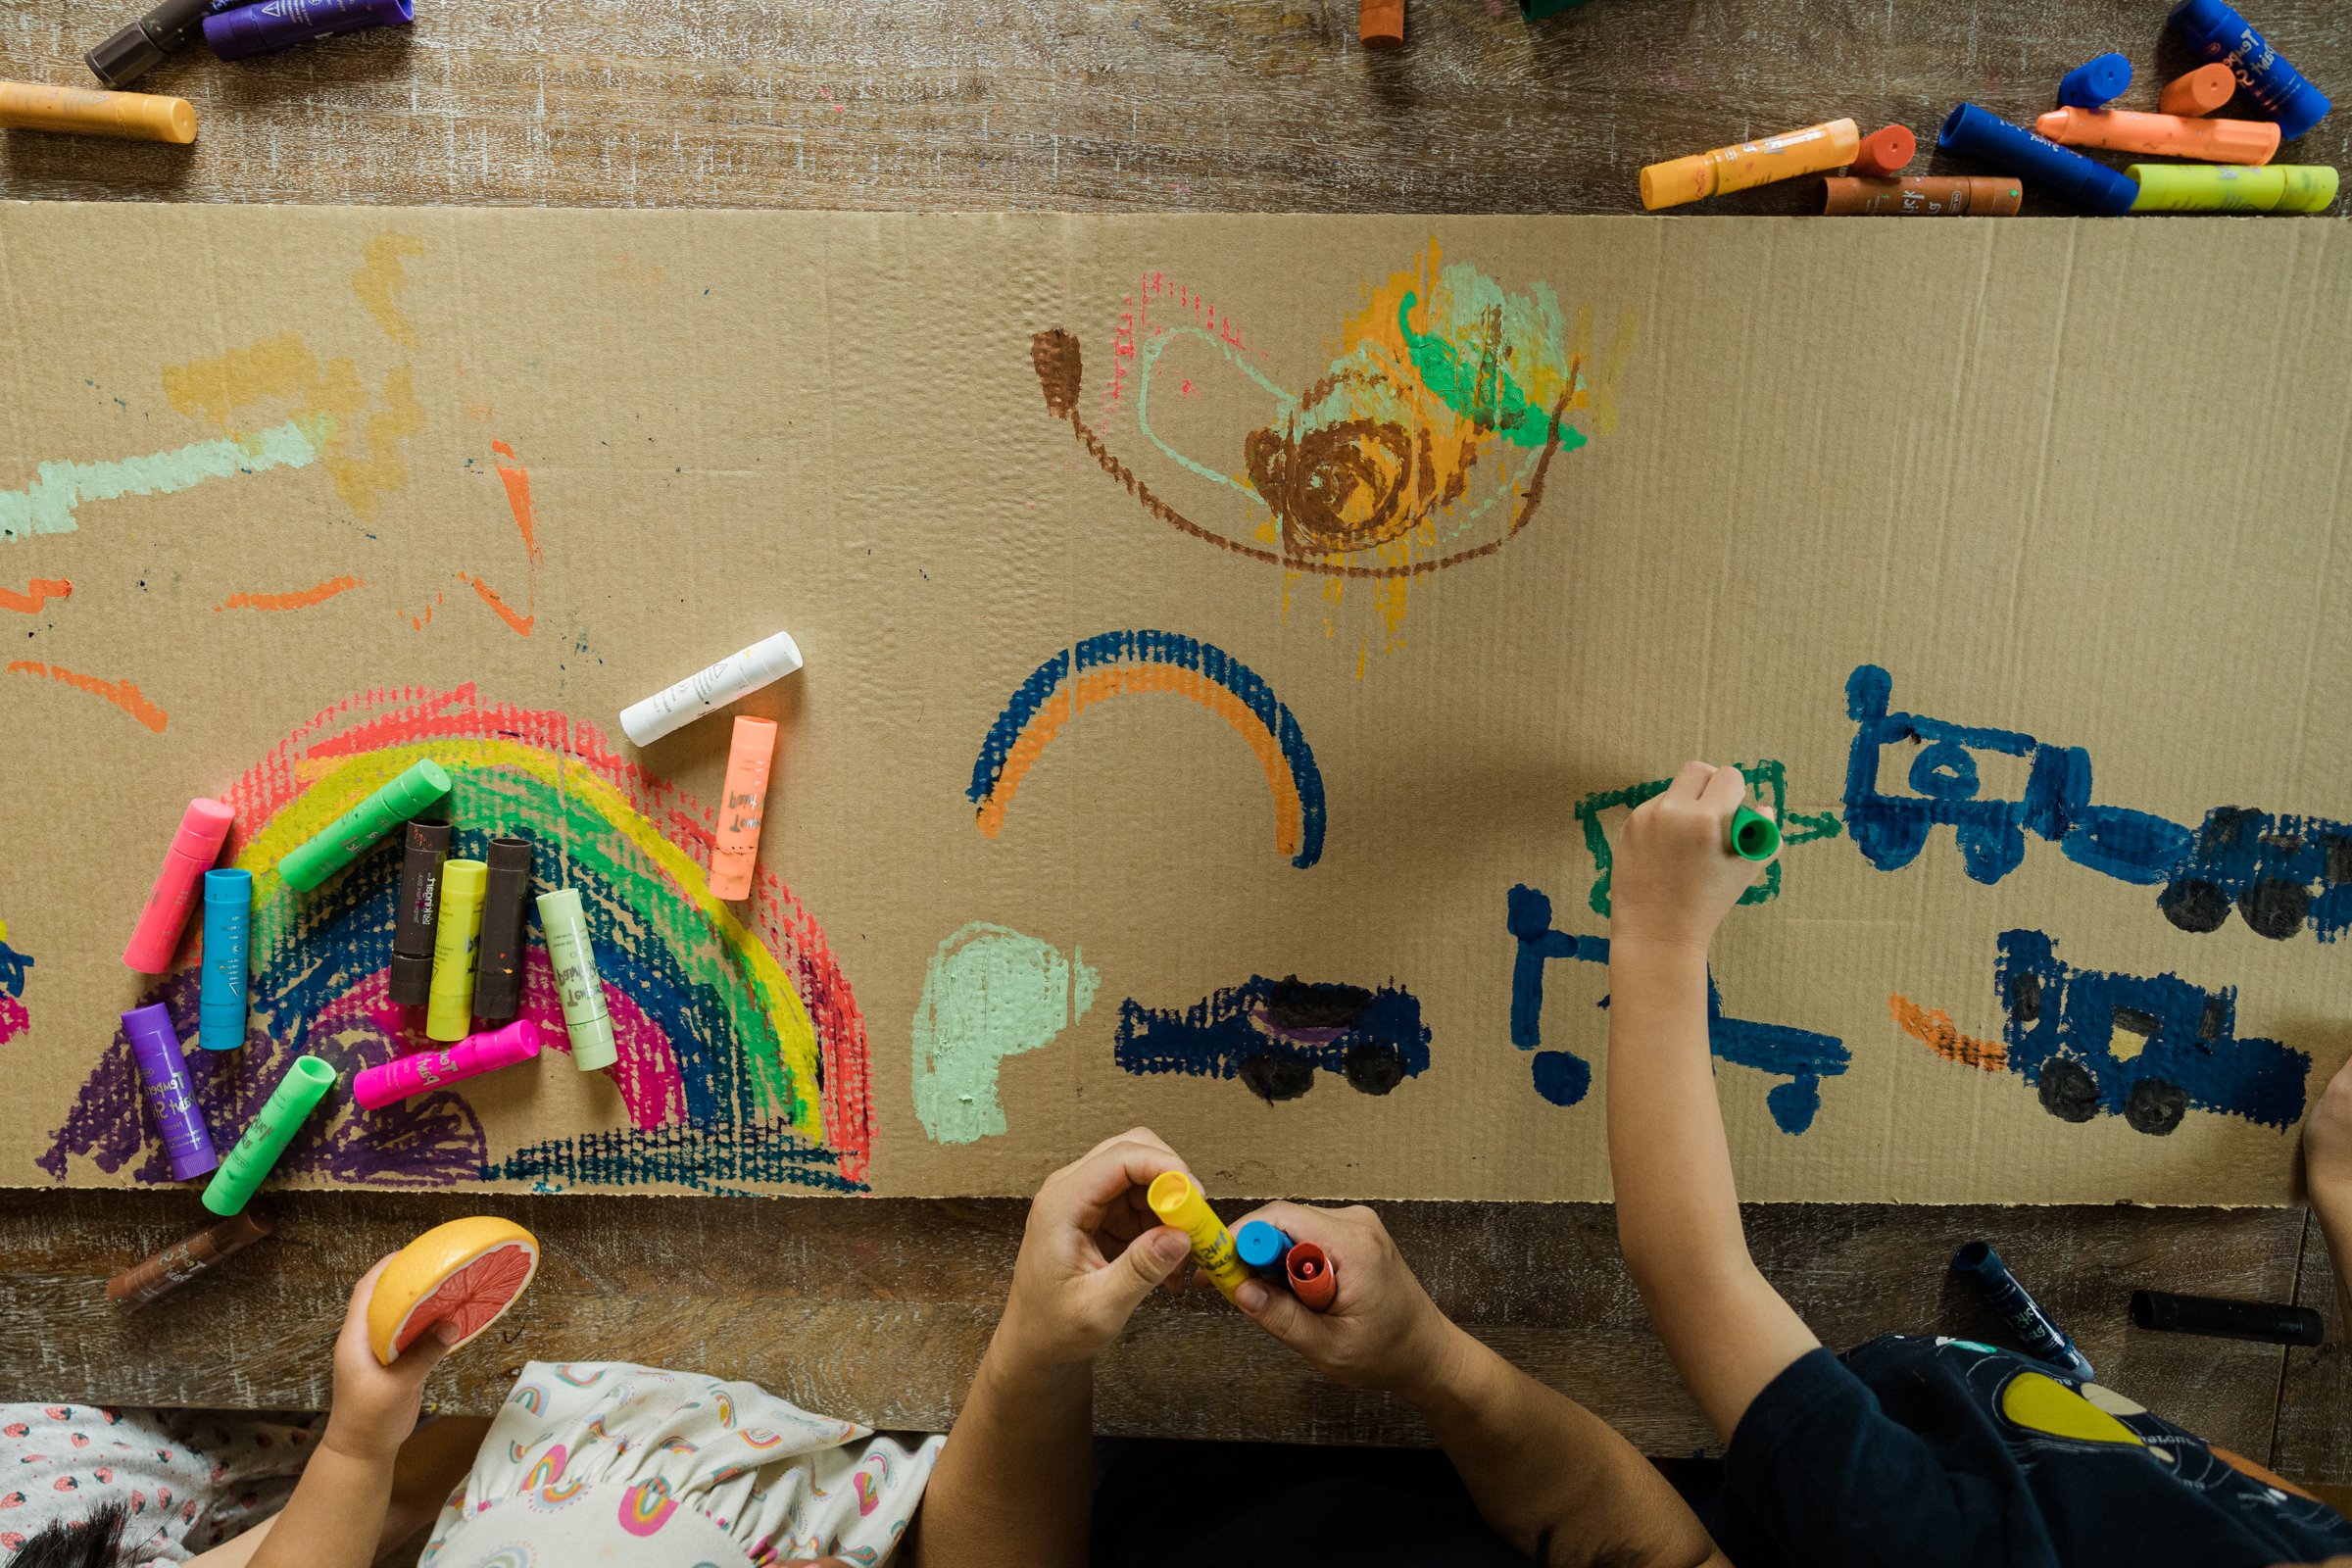 cardboard with colorful children's drawings of rainbows and trucks